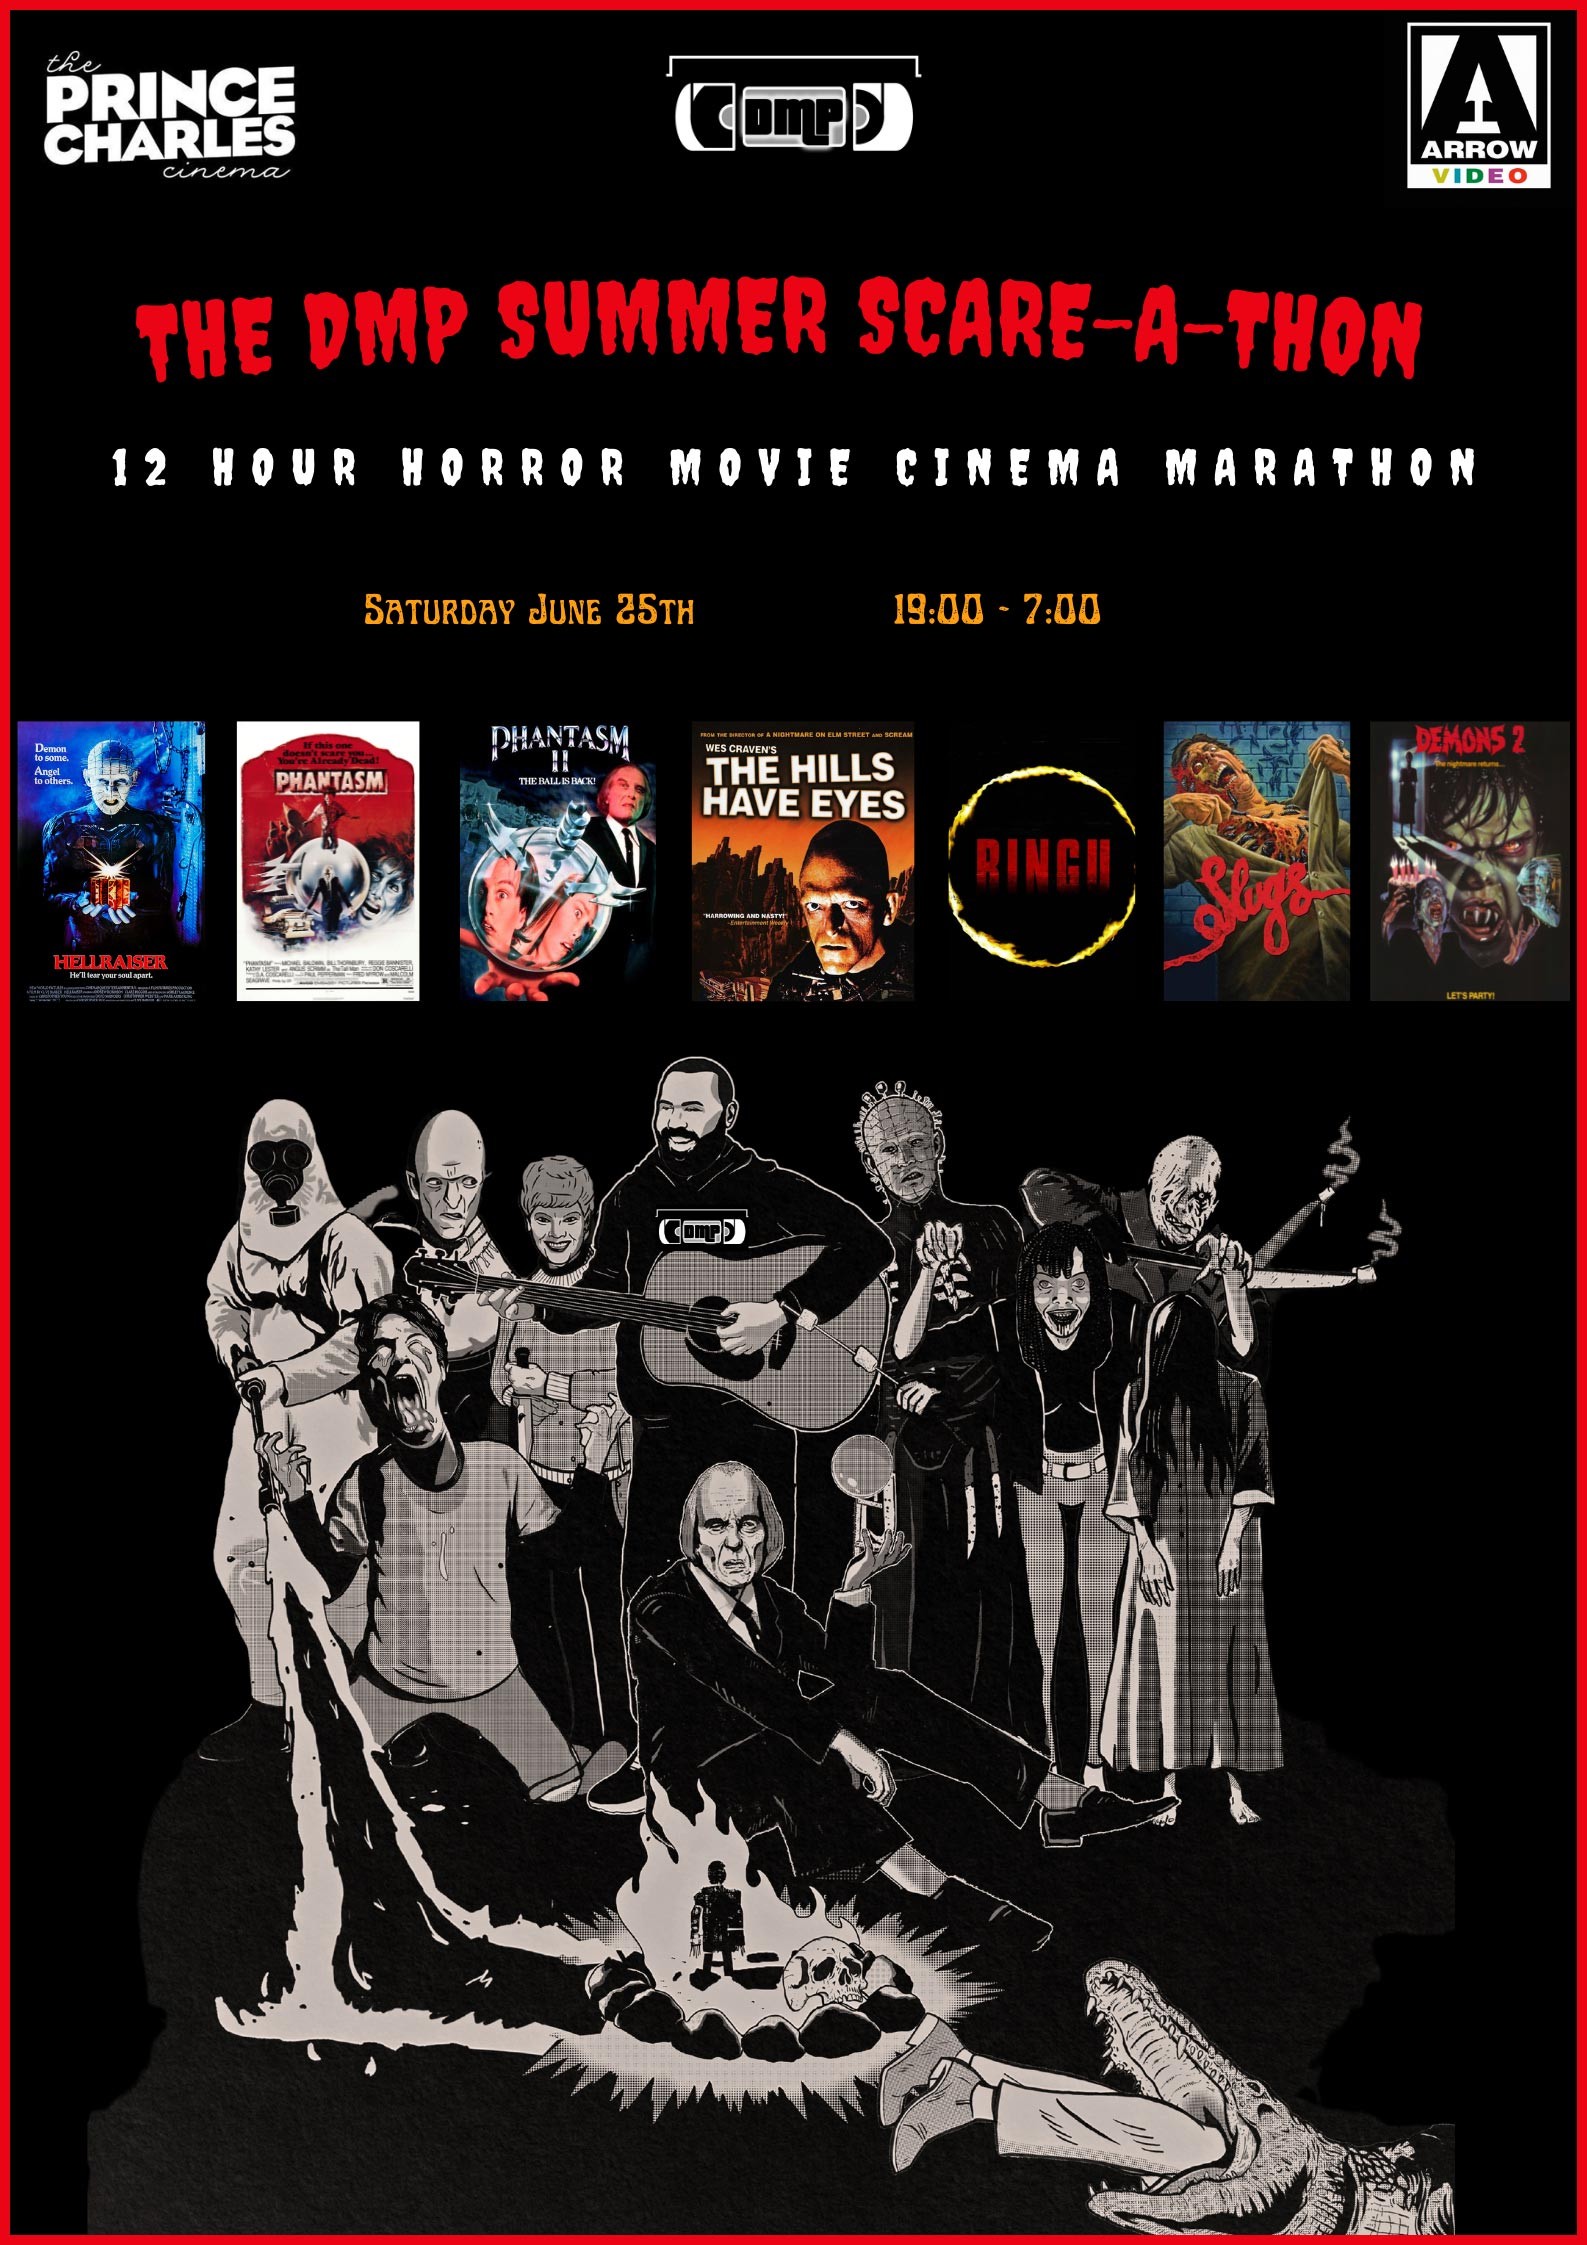 ARROW VIDEO presents THE DMP SUMMER SCARE-A-THON